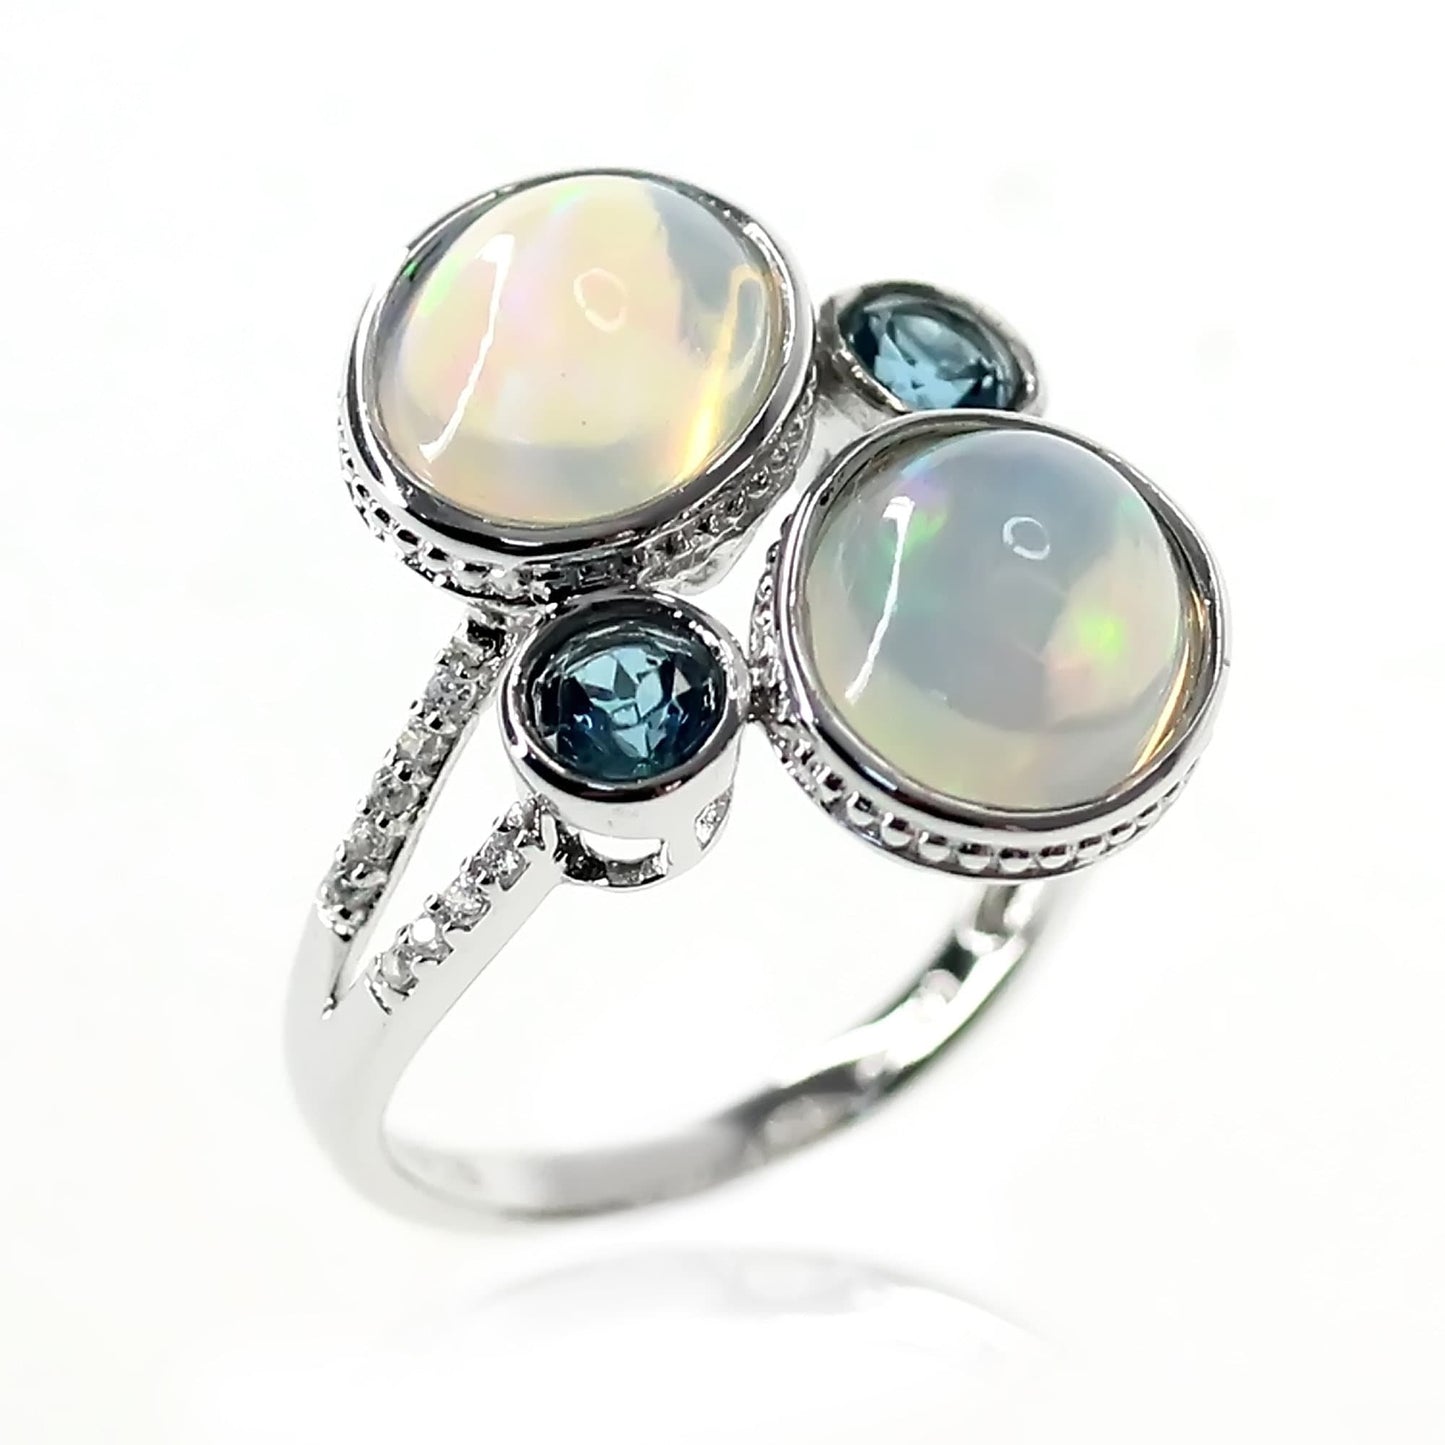 Ethiopian Opal Gemstone Ring, 925 Sterling Silver Ring, Engagement Ring, Birthstone Ring-Gemstone Jewelry Anniversary Gift-Gift For Her